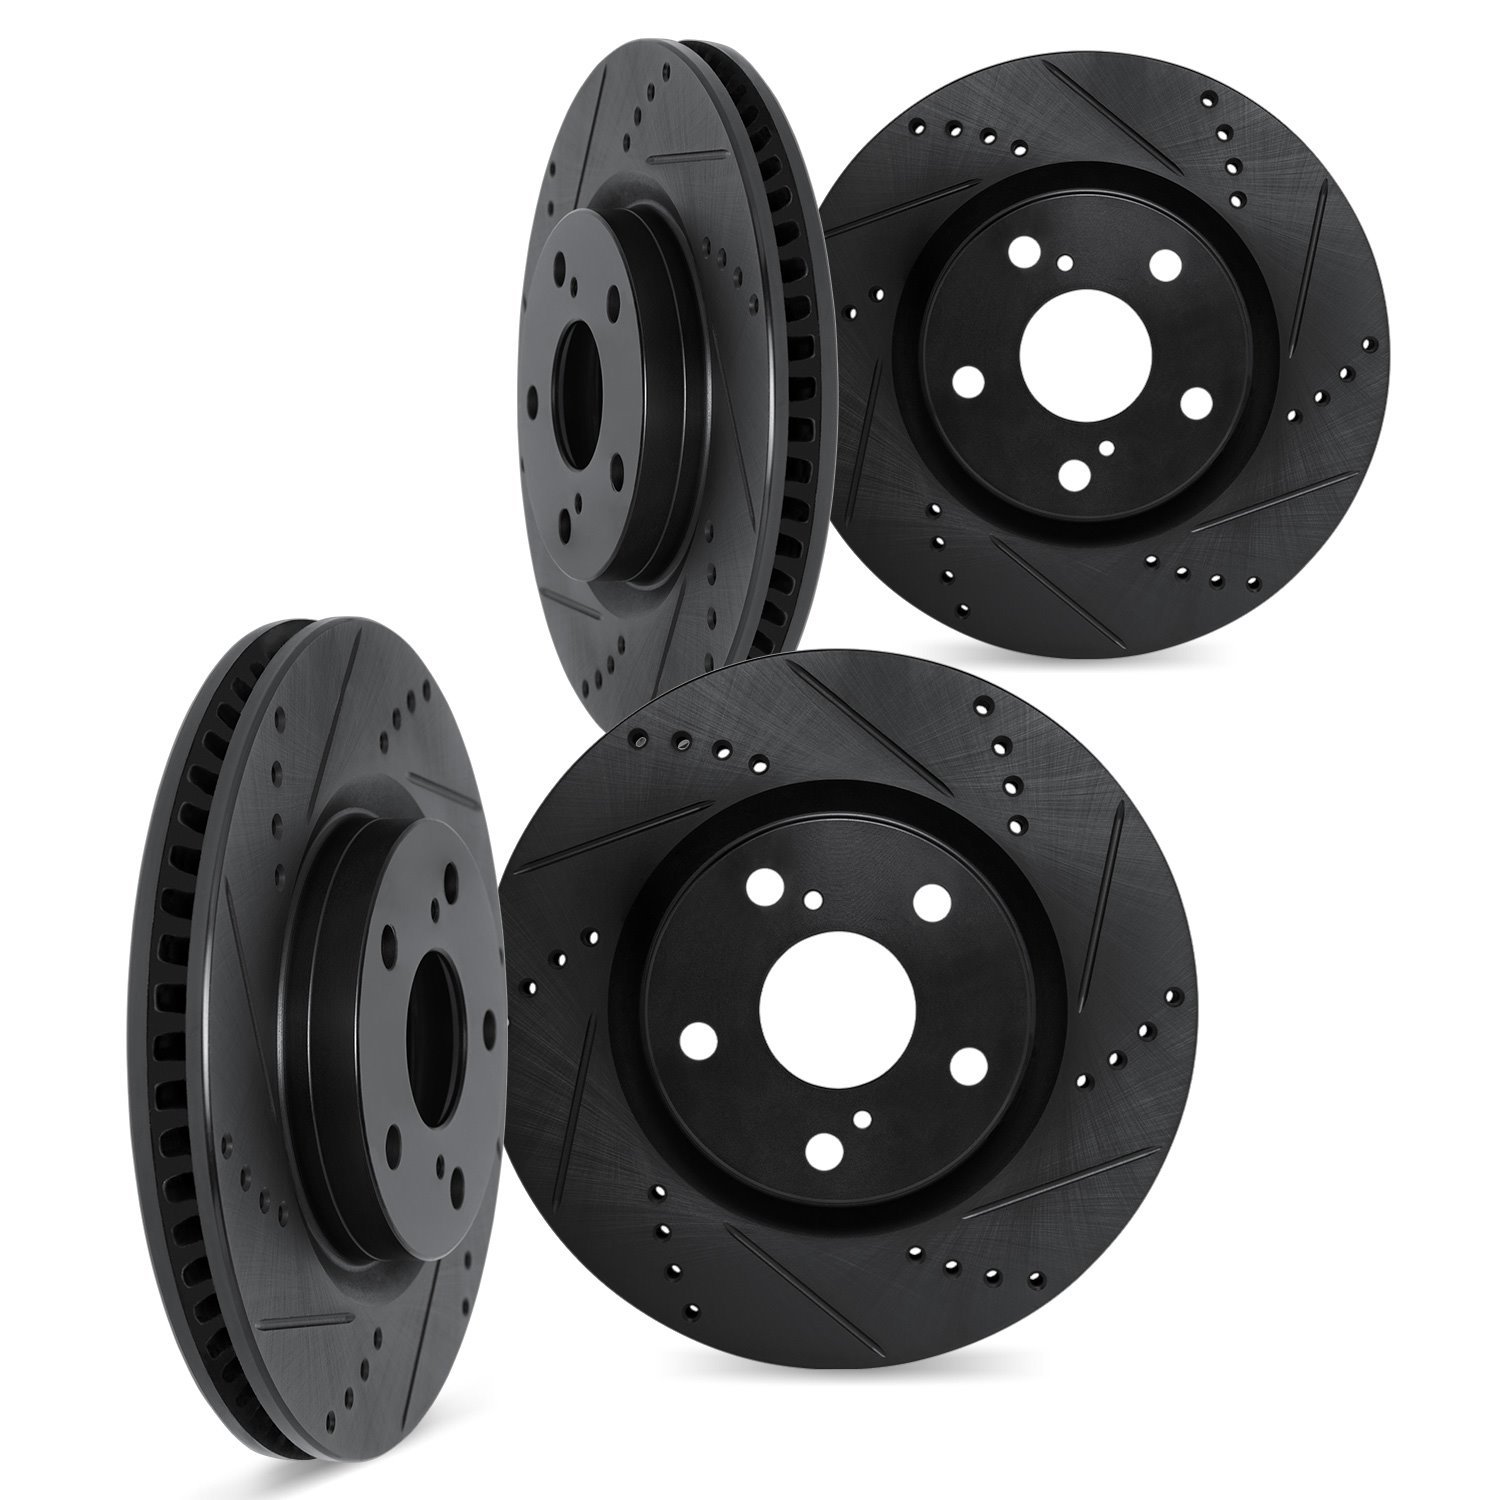 8004-46011 Drilled/Slotted Brake Rotors [Black], Fits Select GM, Position: Front and Rear